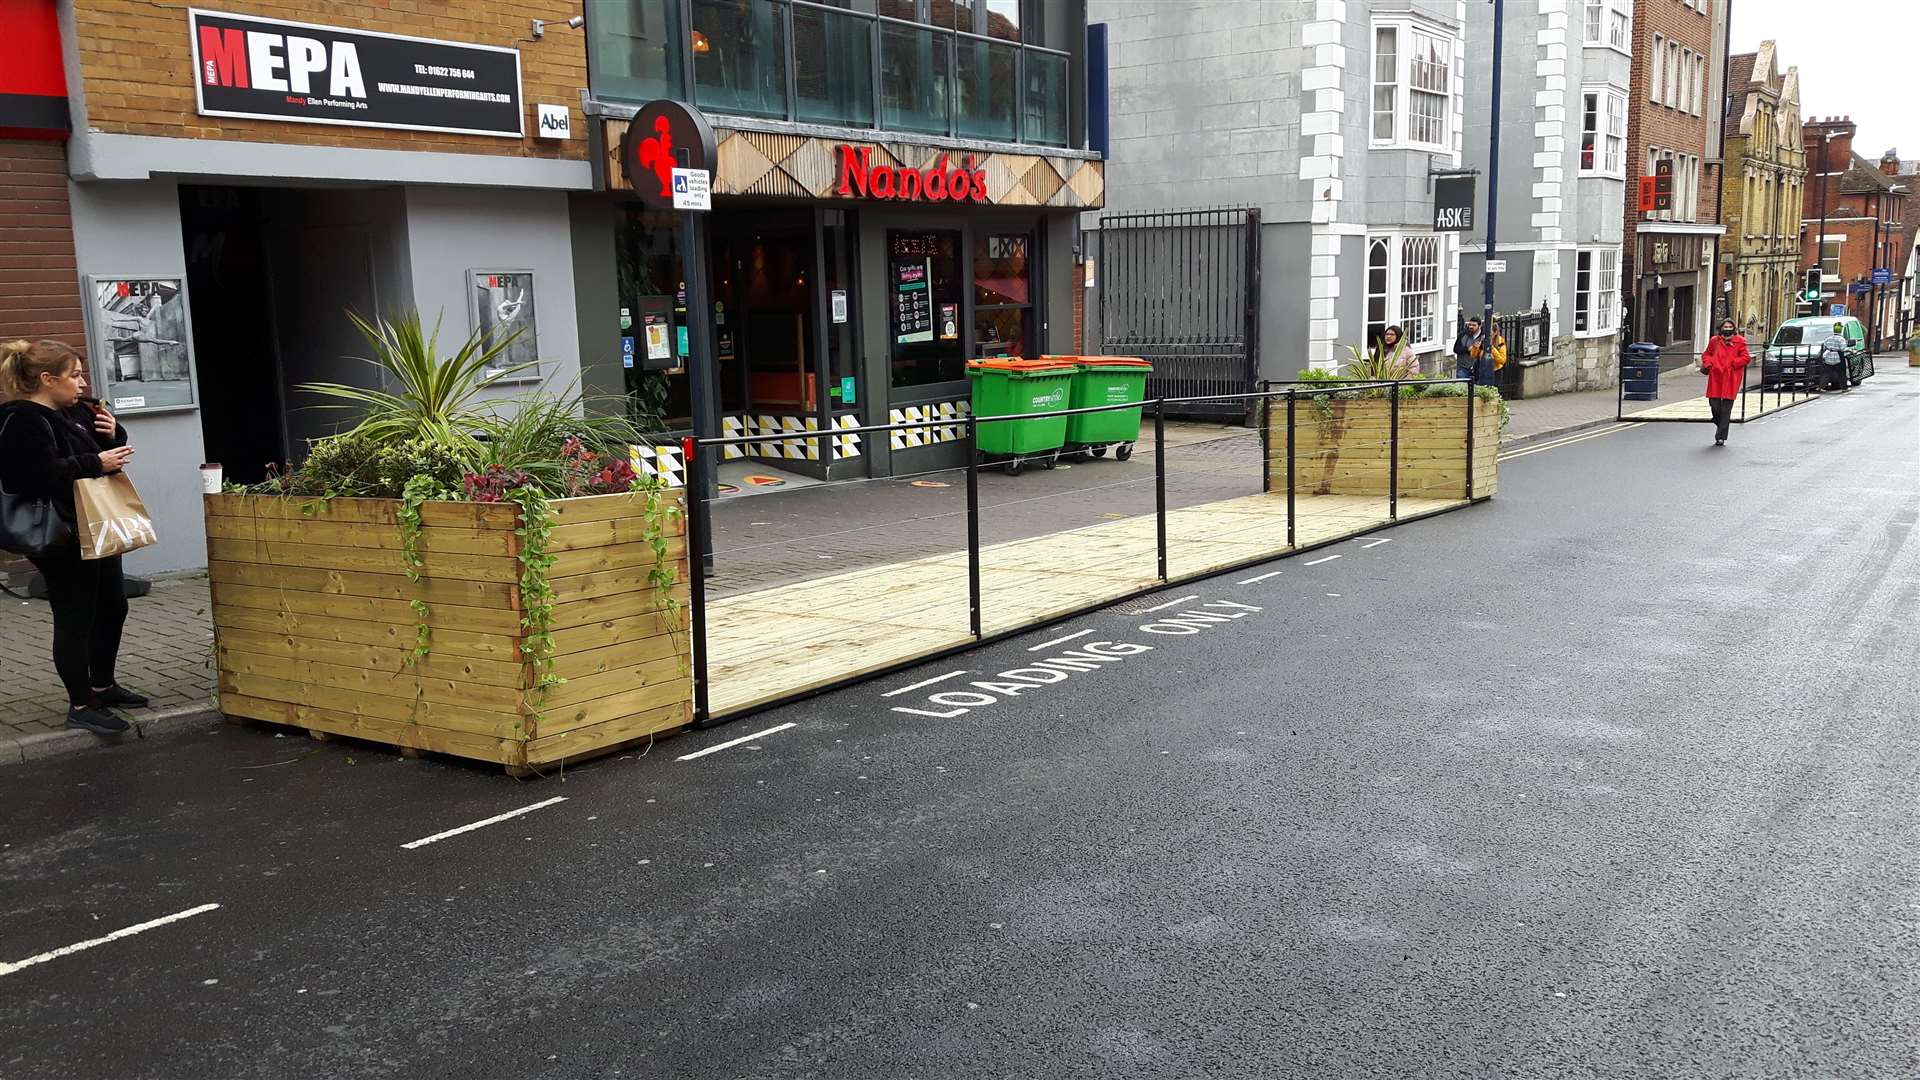 Maidstone's parklets have remained largely unused